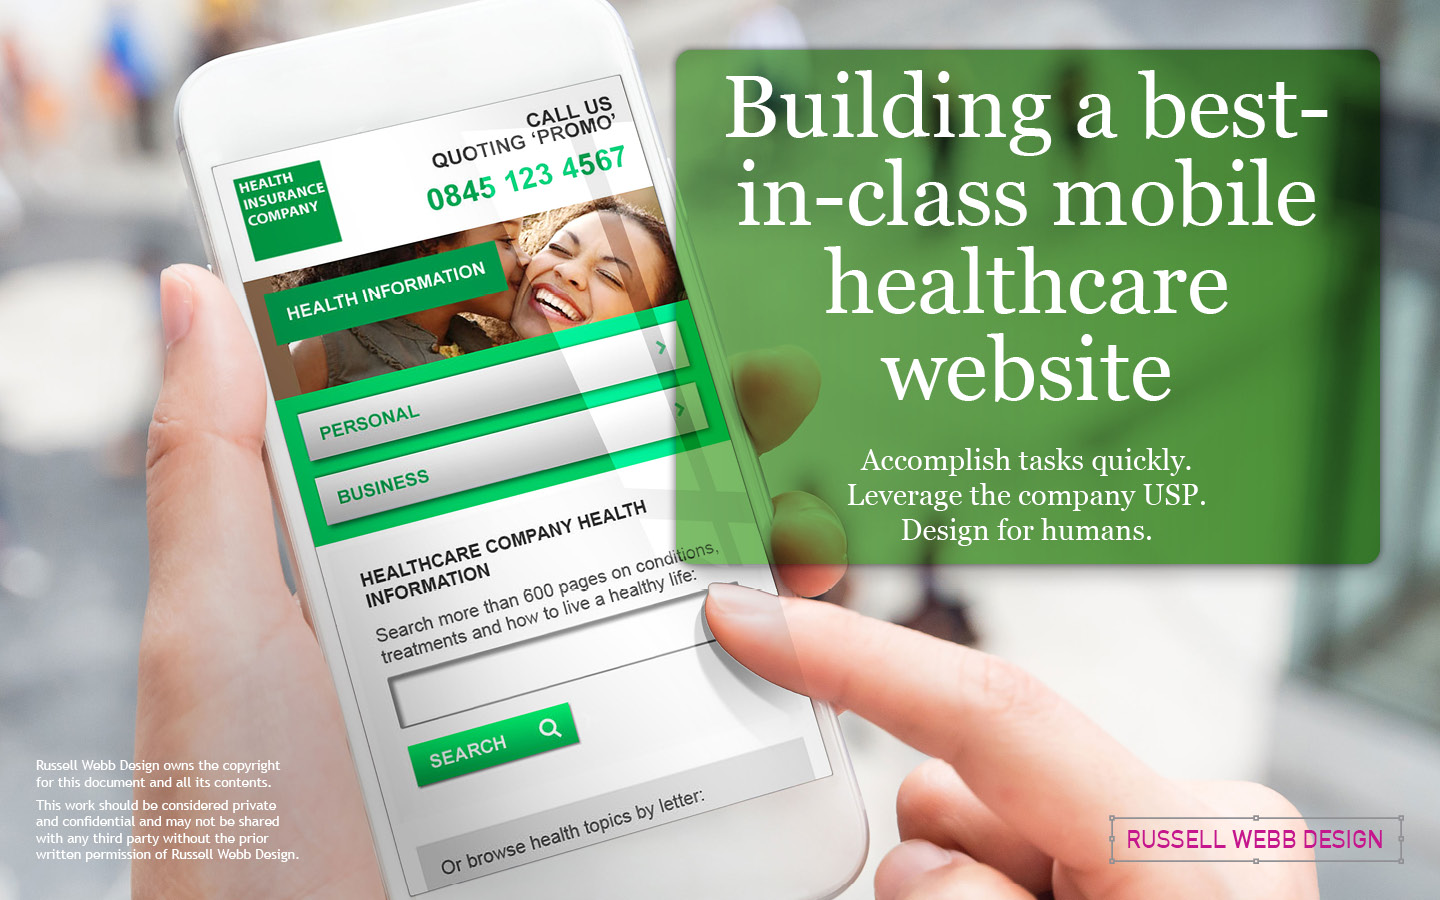 Building a best-in-class mobile healthcare website